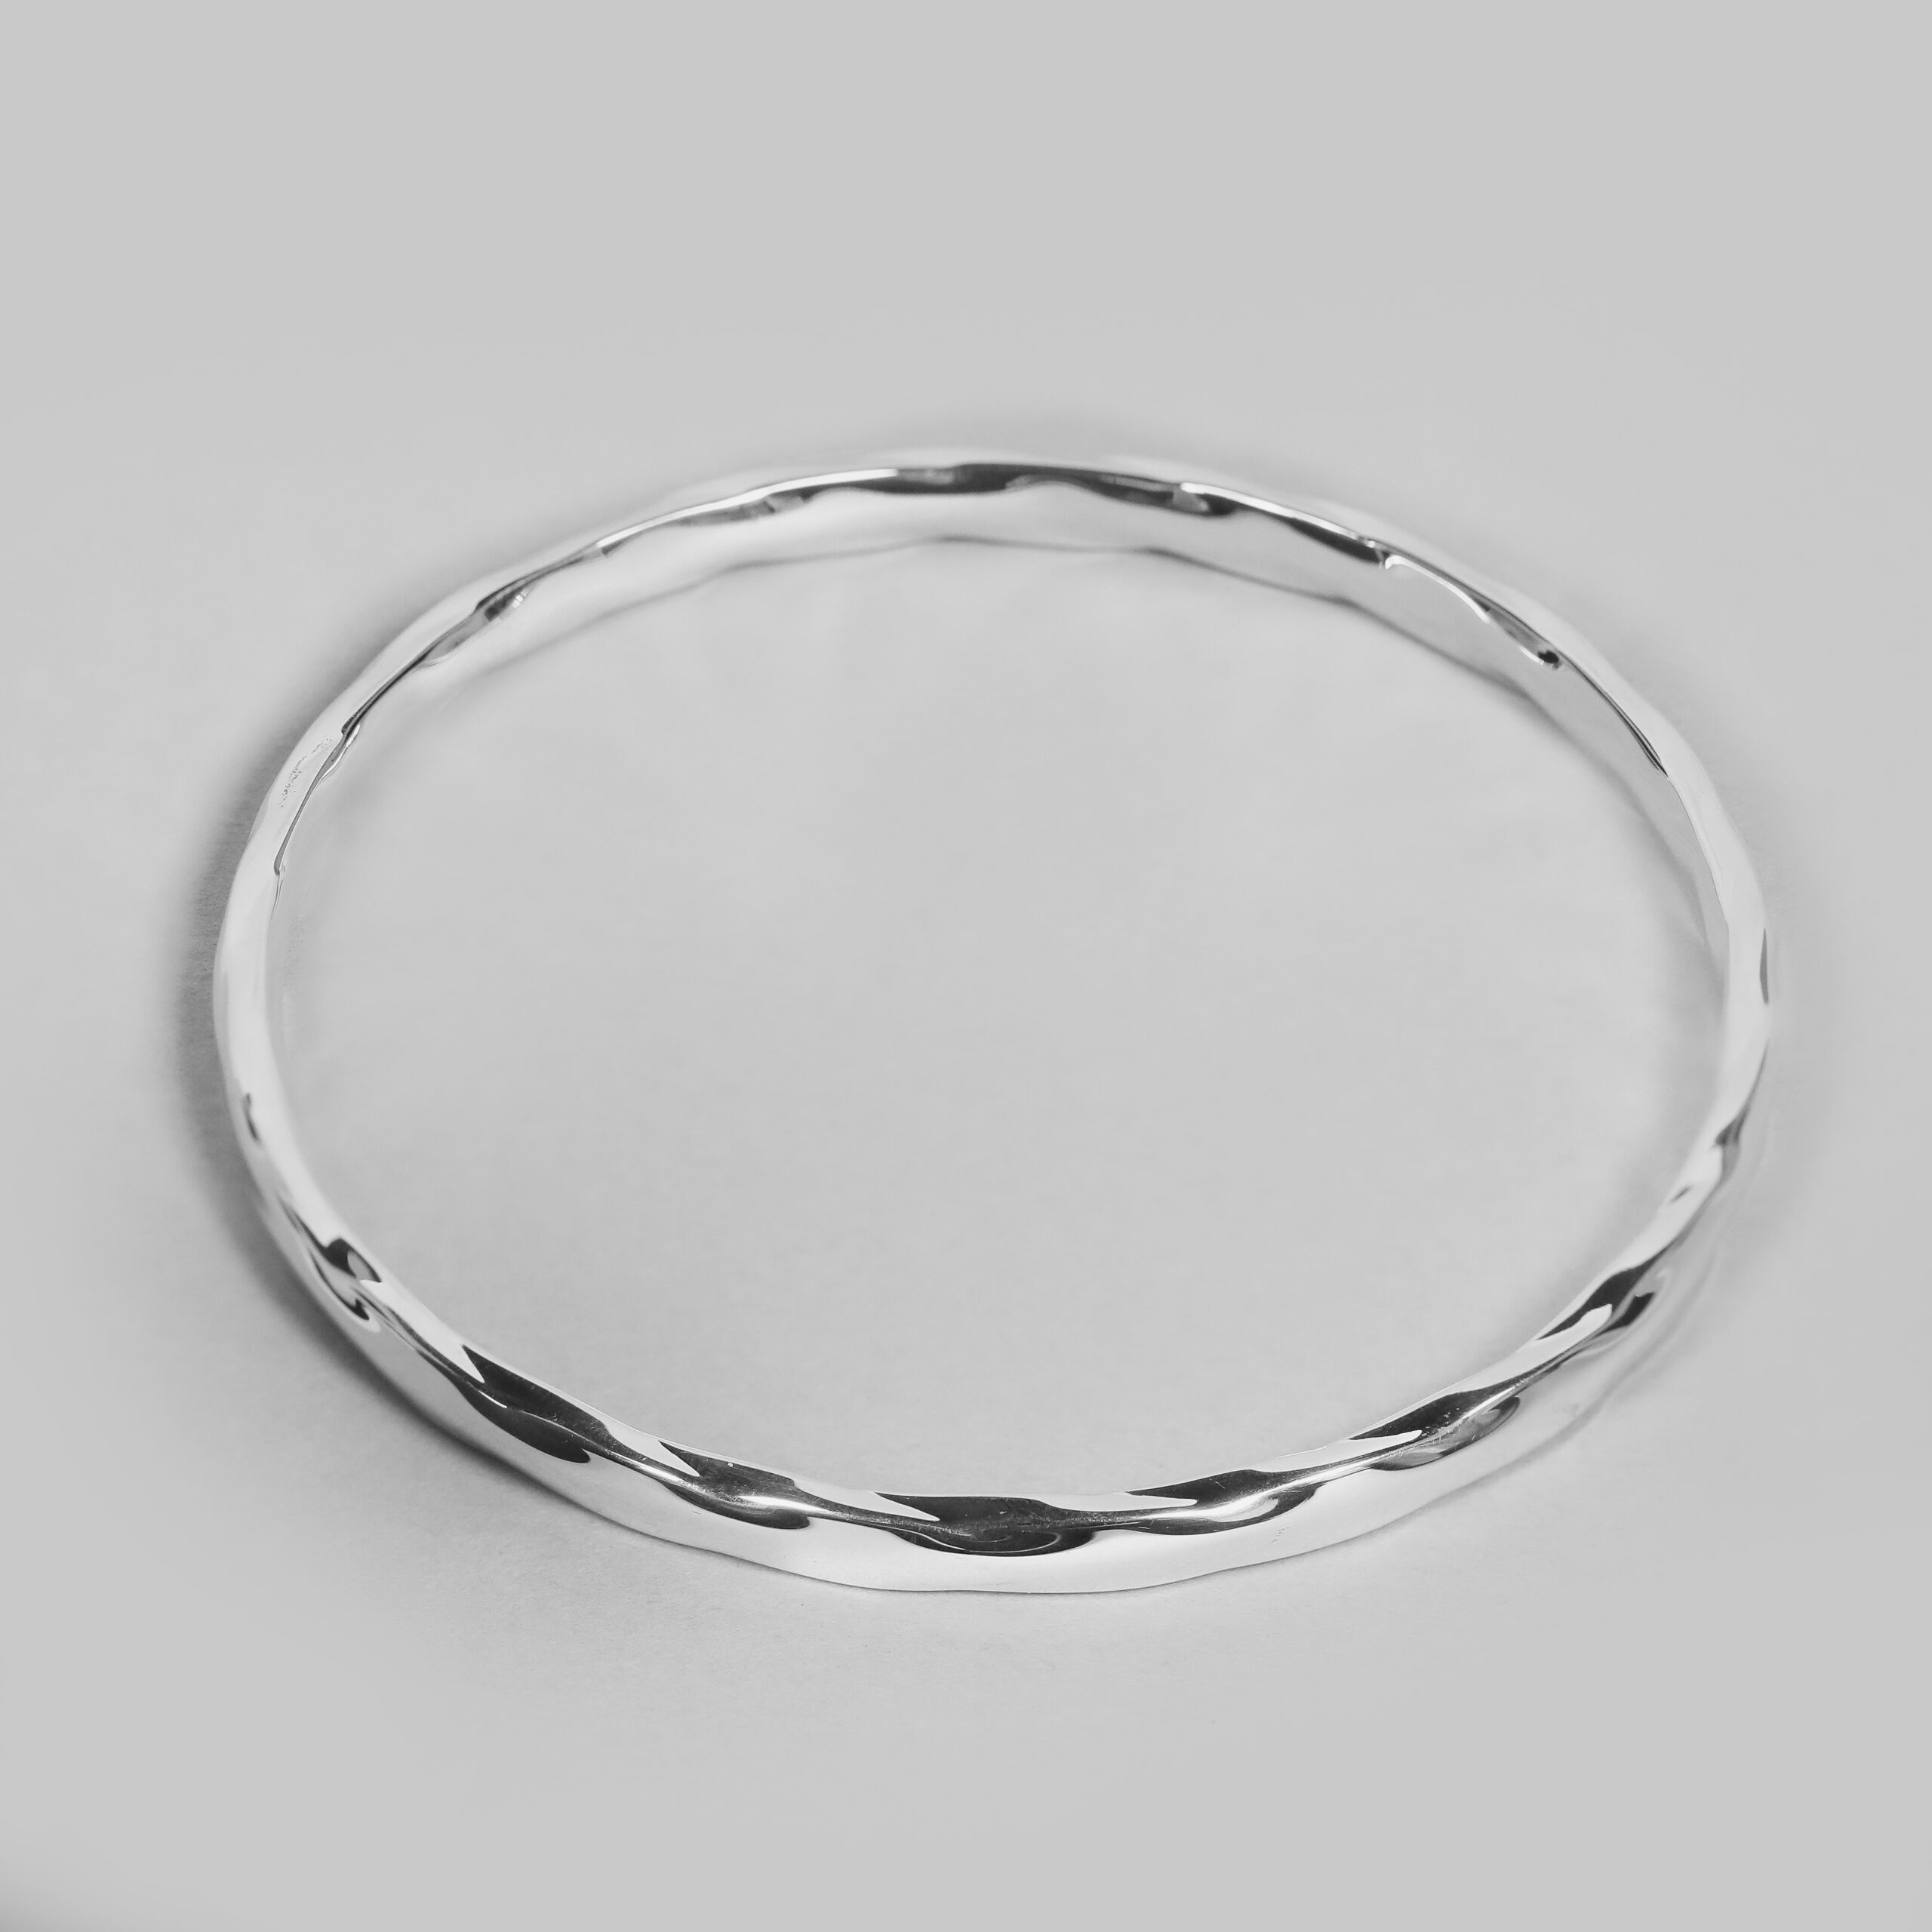 4mm Twisted Slave bangle in sterling silver. – Simply Silver Jewellery